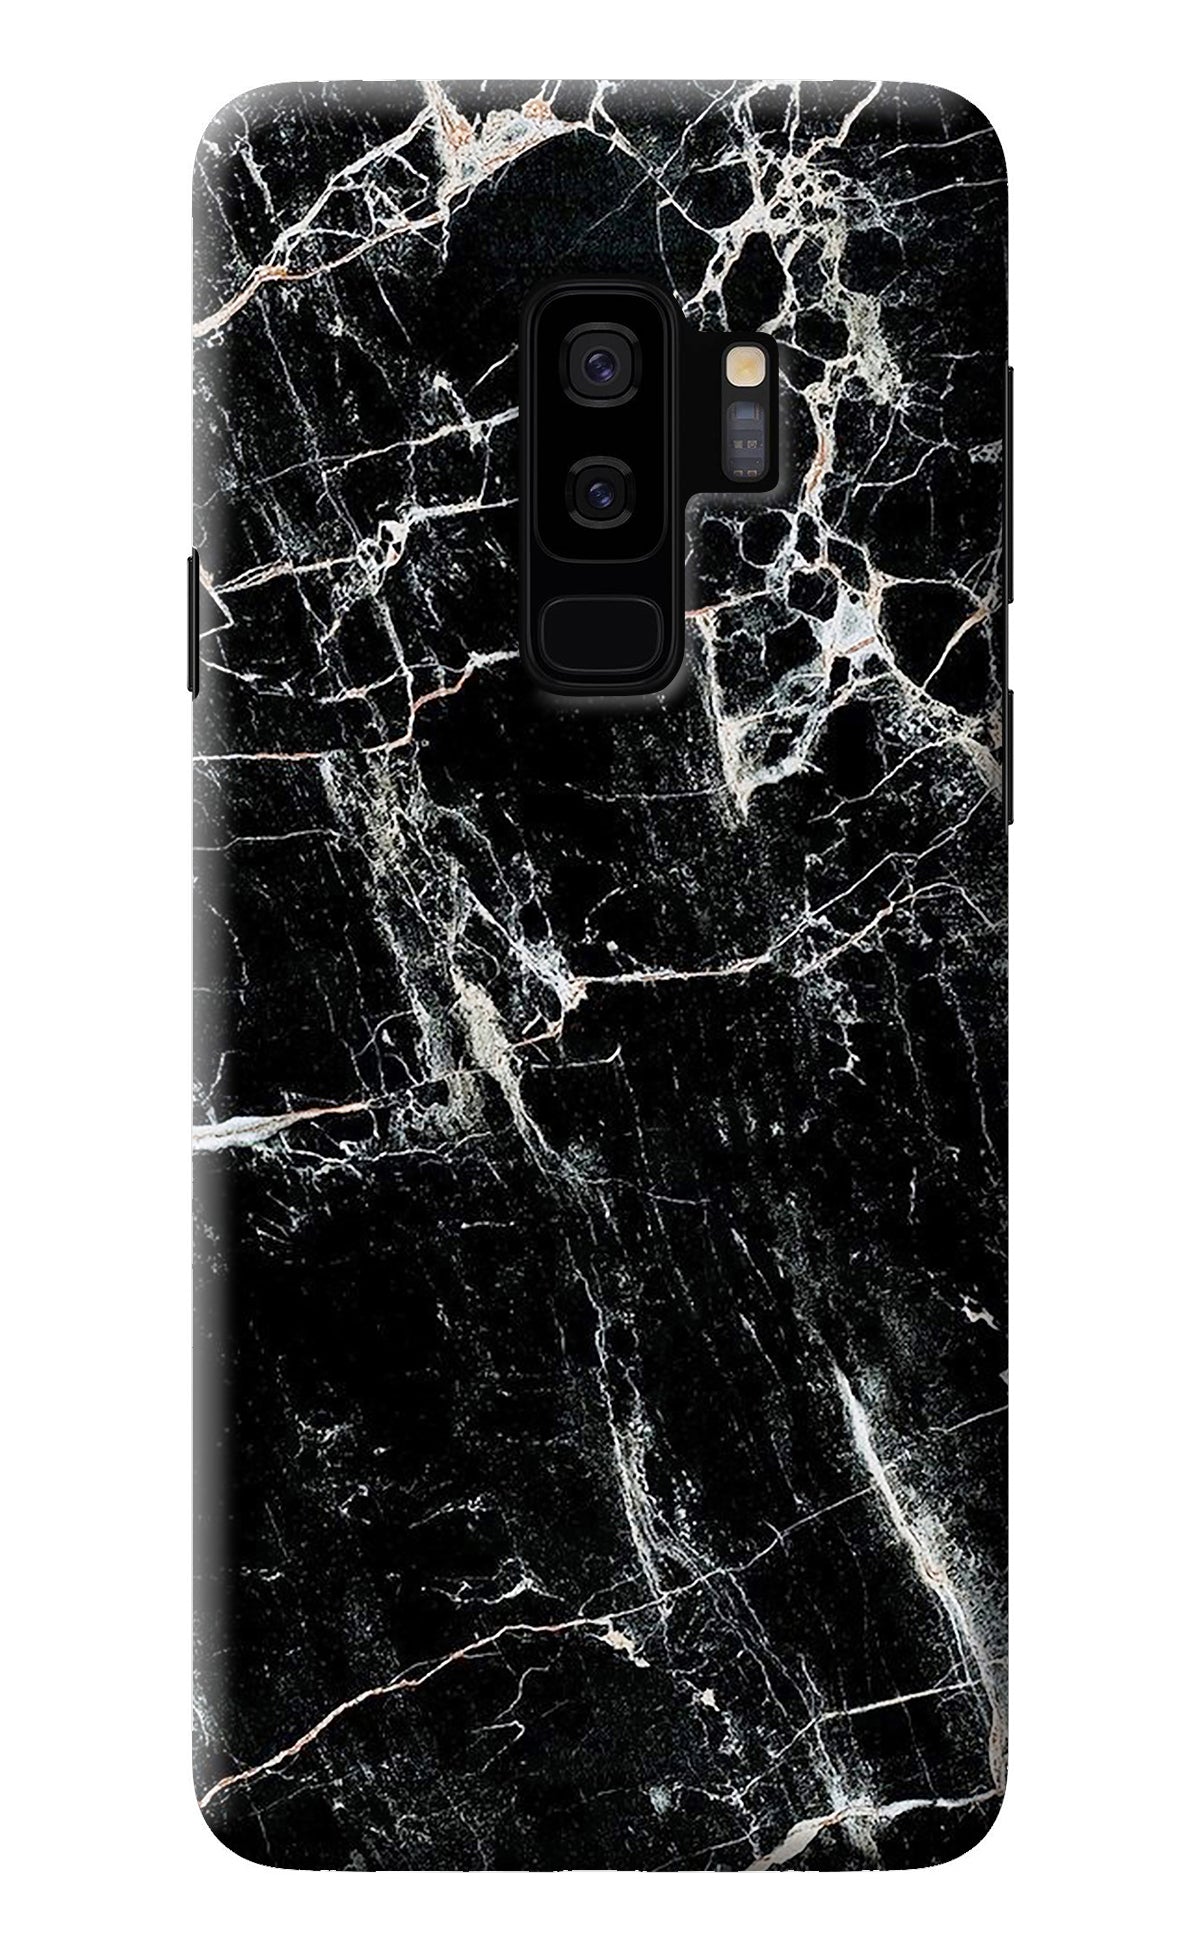 Black Marble Texture Samsung S9 Plus Back Cover